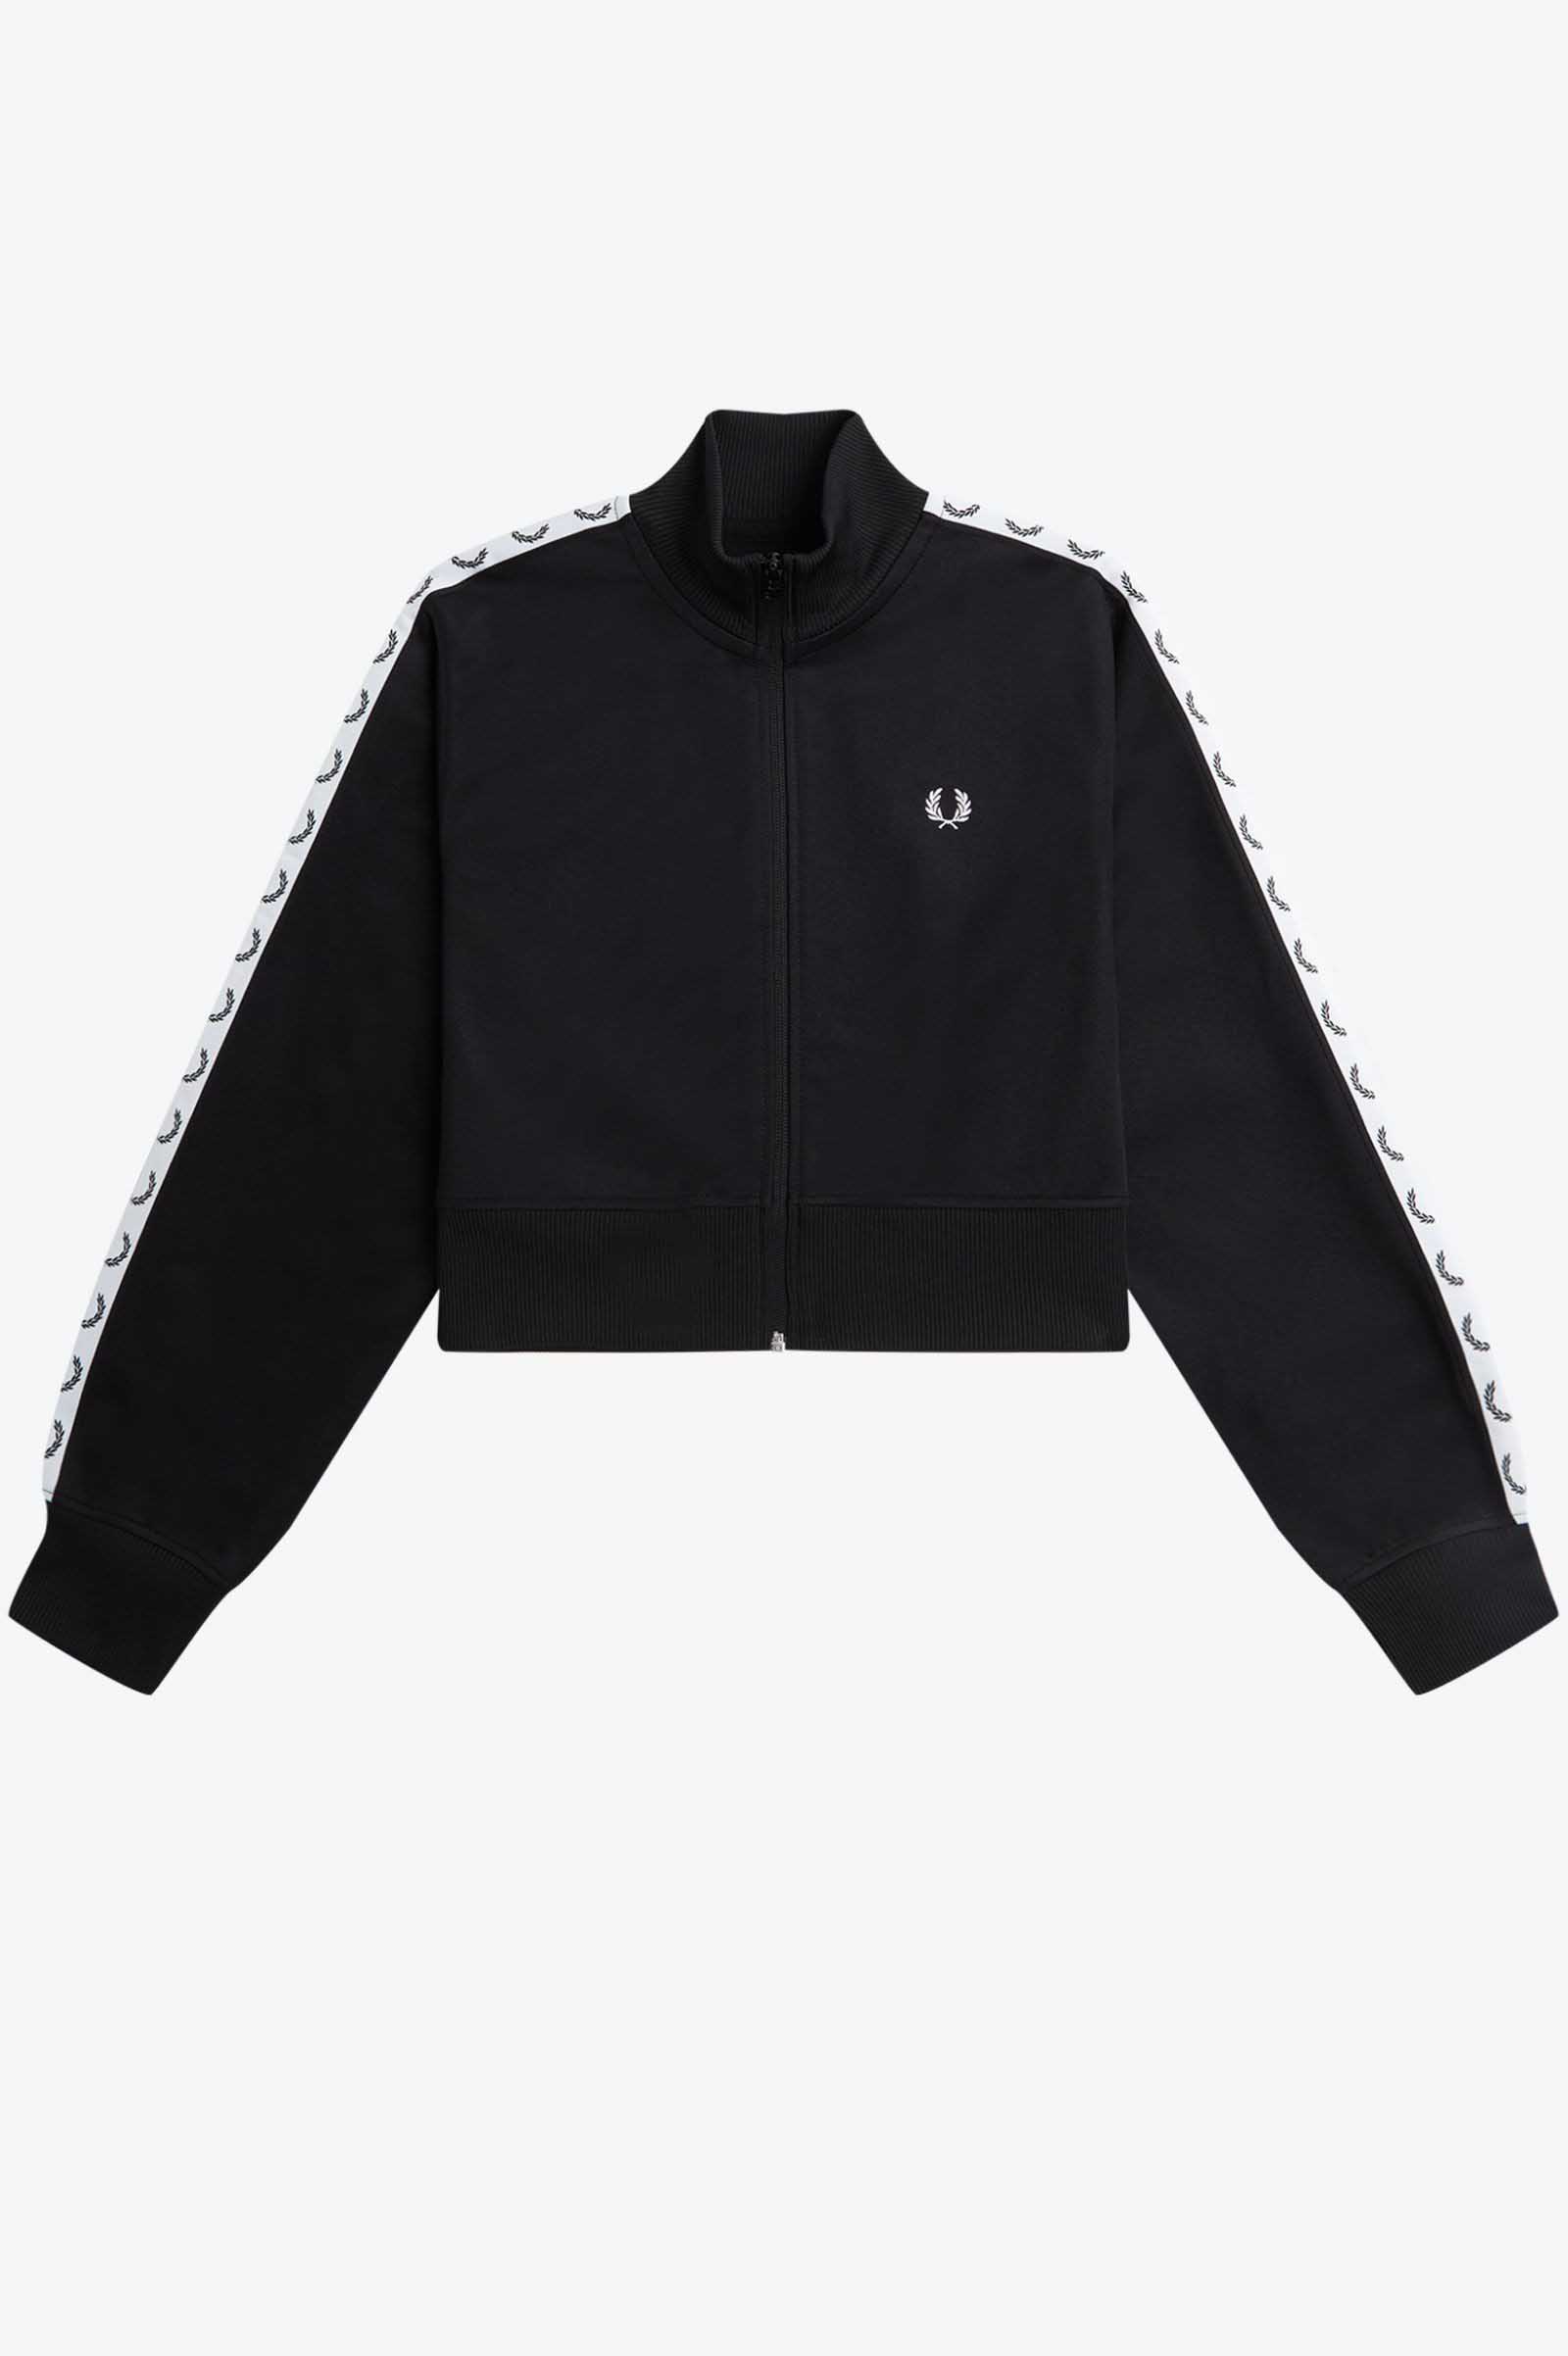 FREDPERRY F2552 TAPED TRACK JACKET